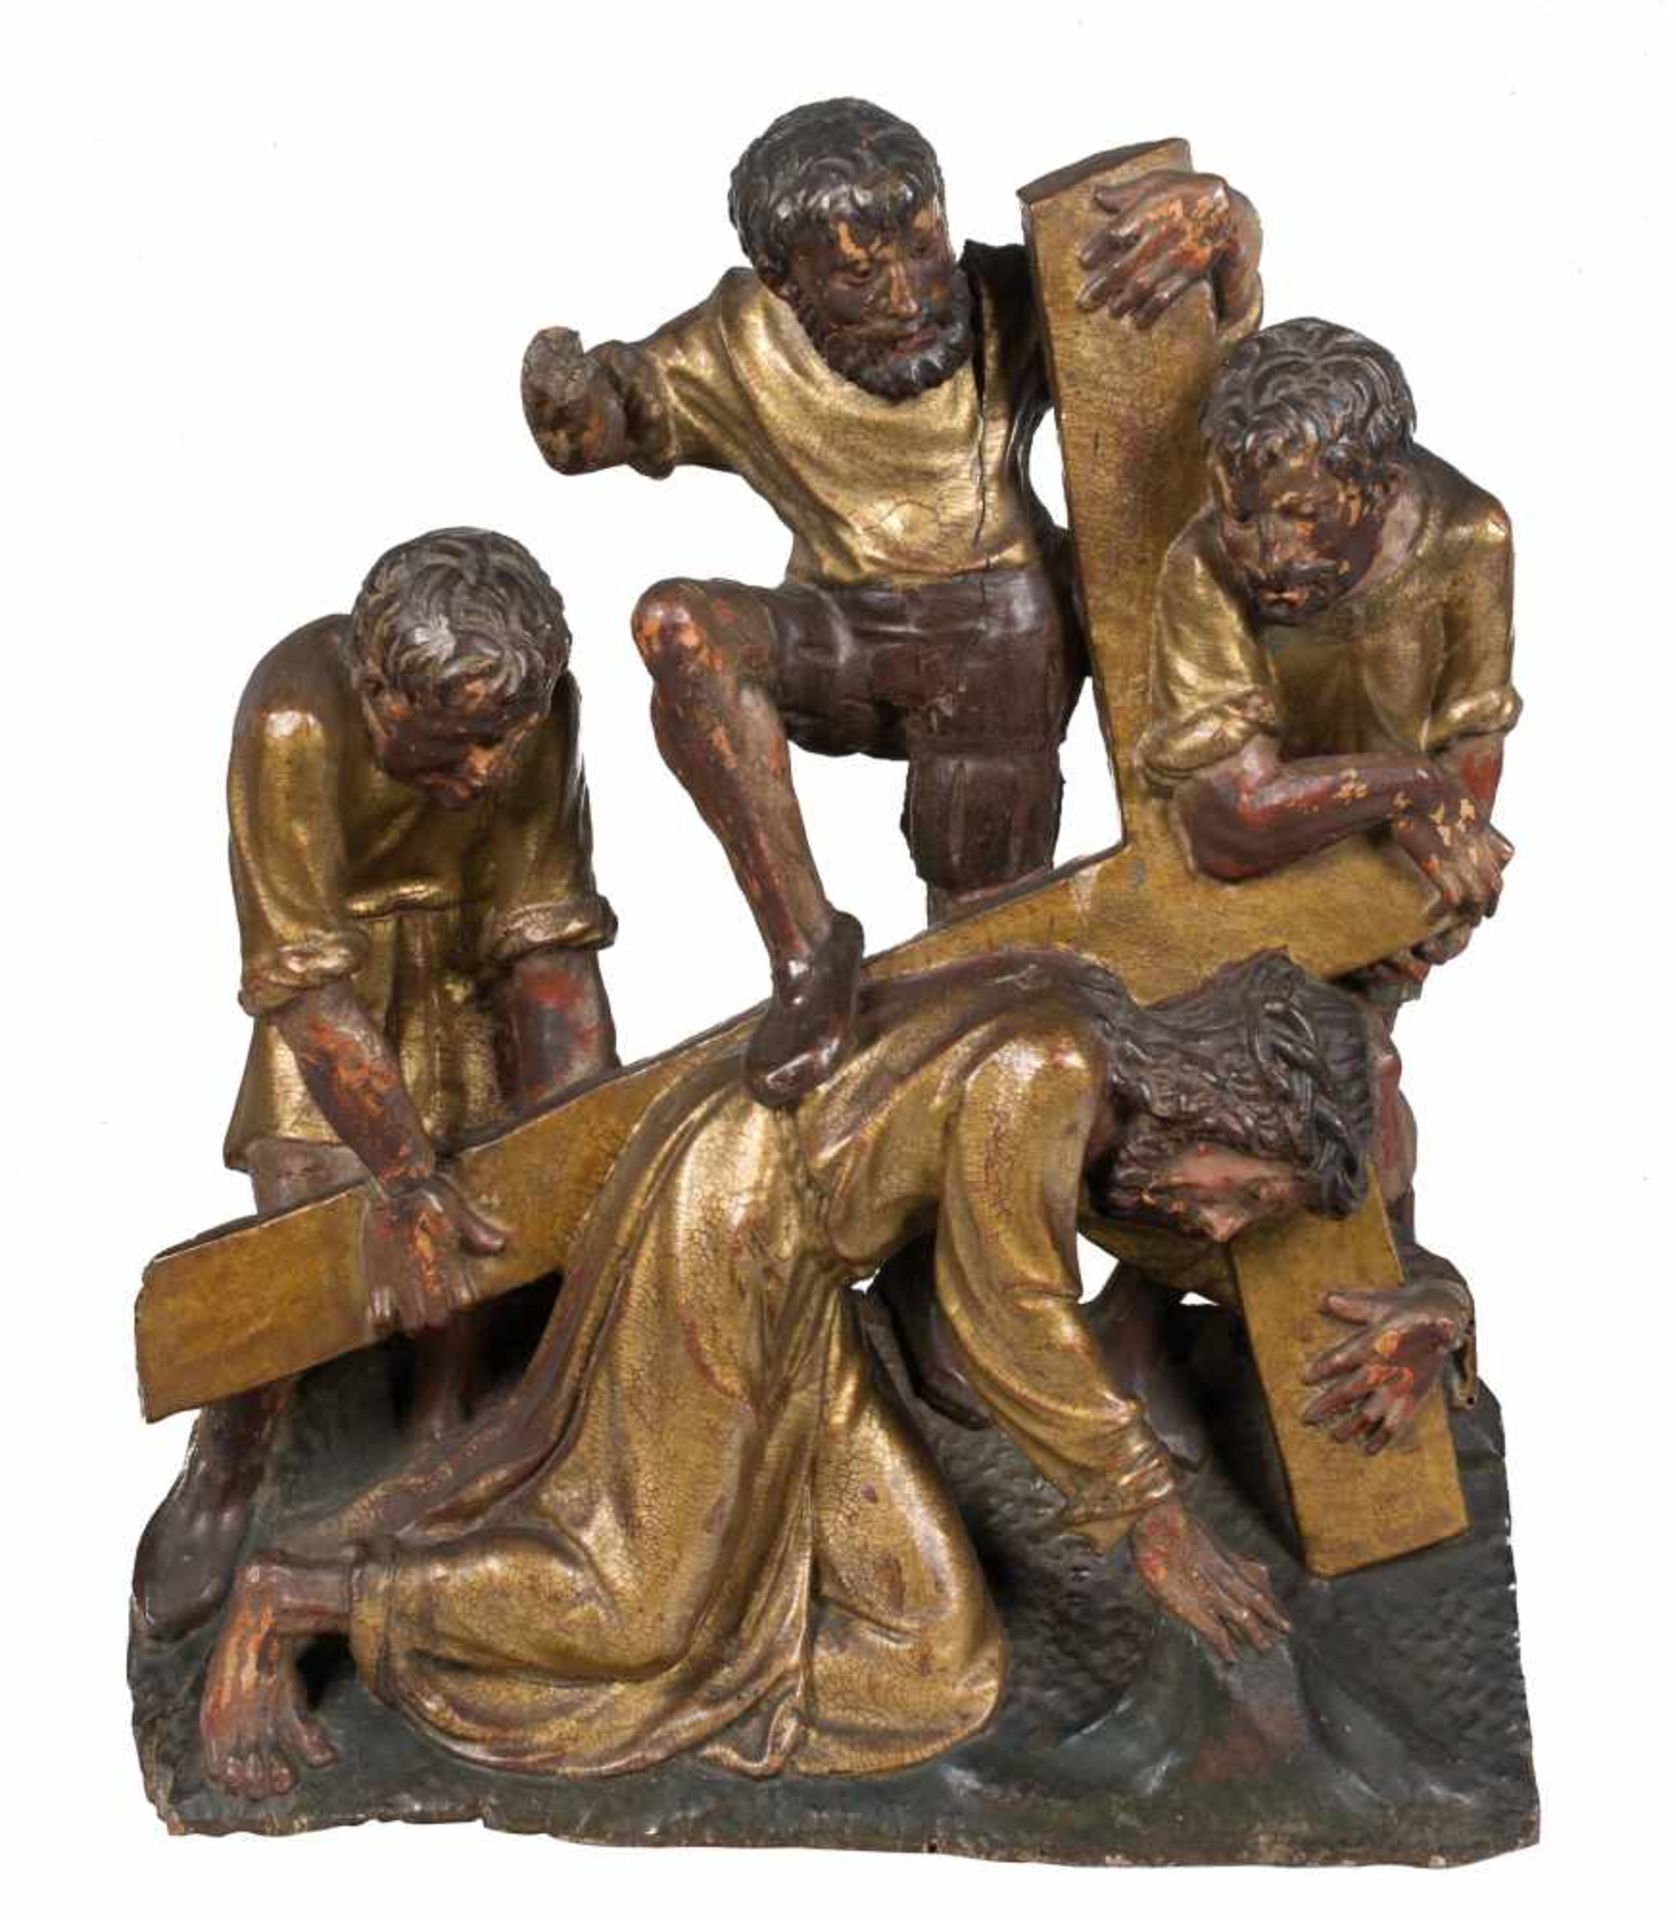 Carved, gilded and polychromed wooden sculptural group. Castilian School. Circa 1500.↵↵The scene